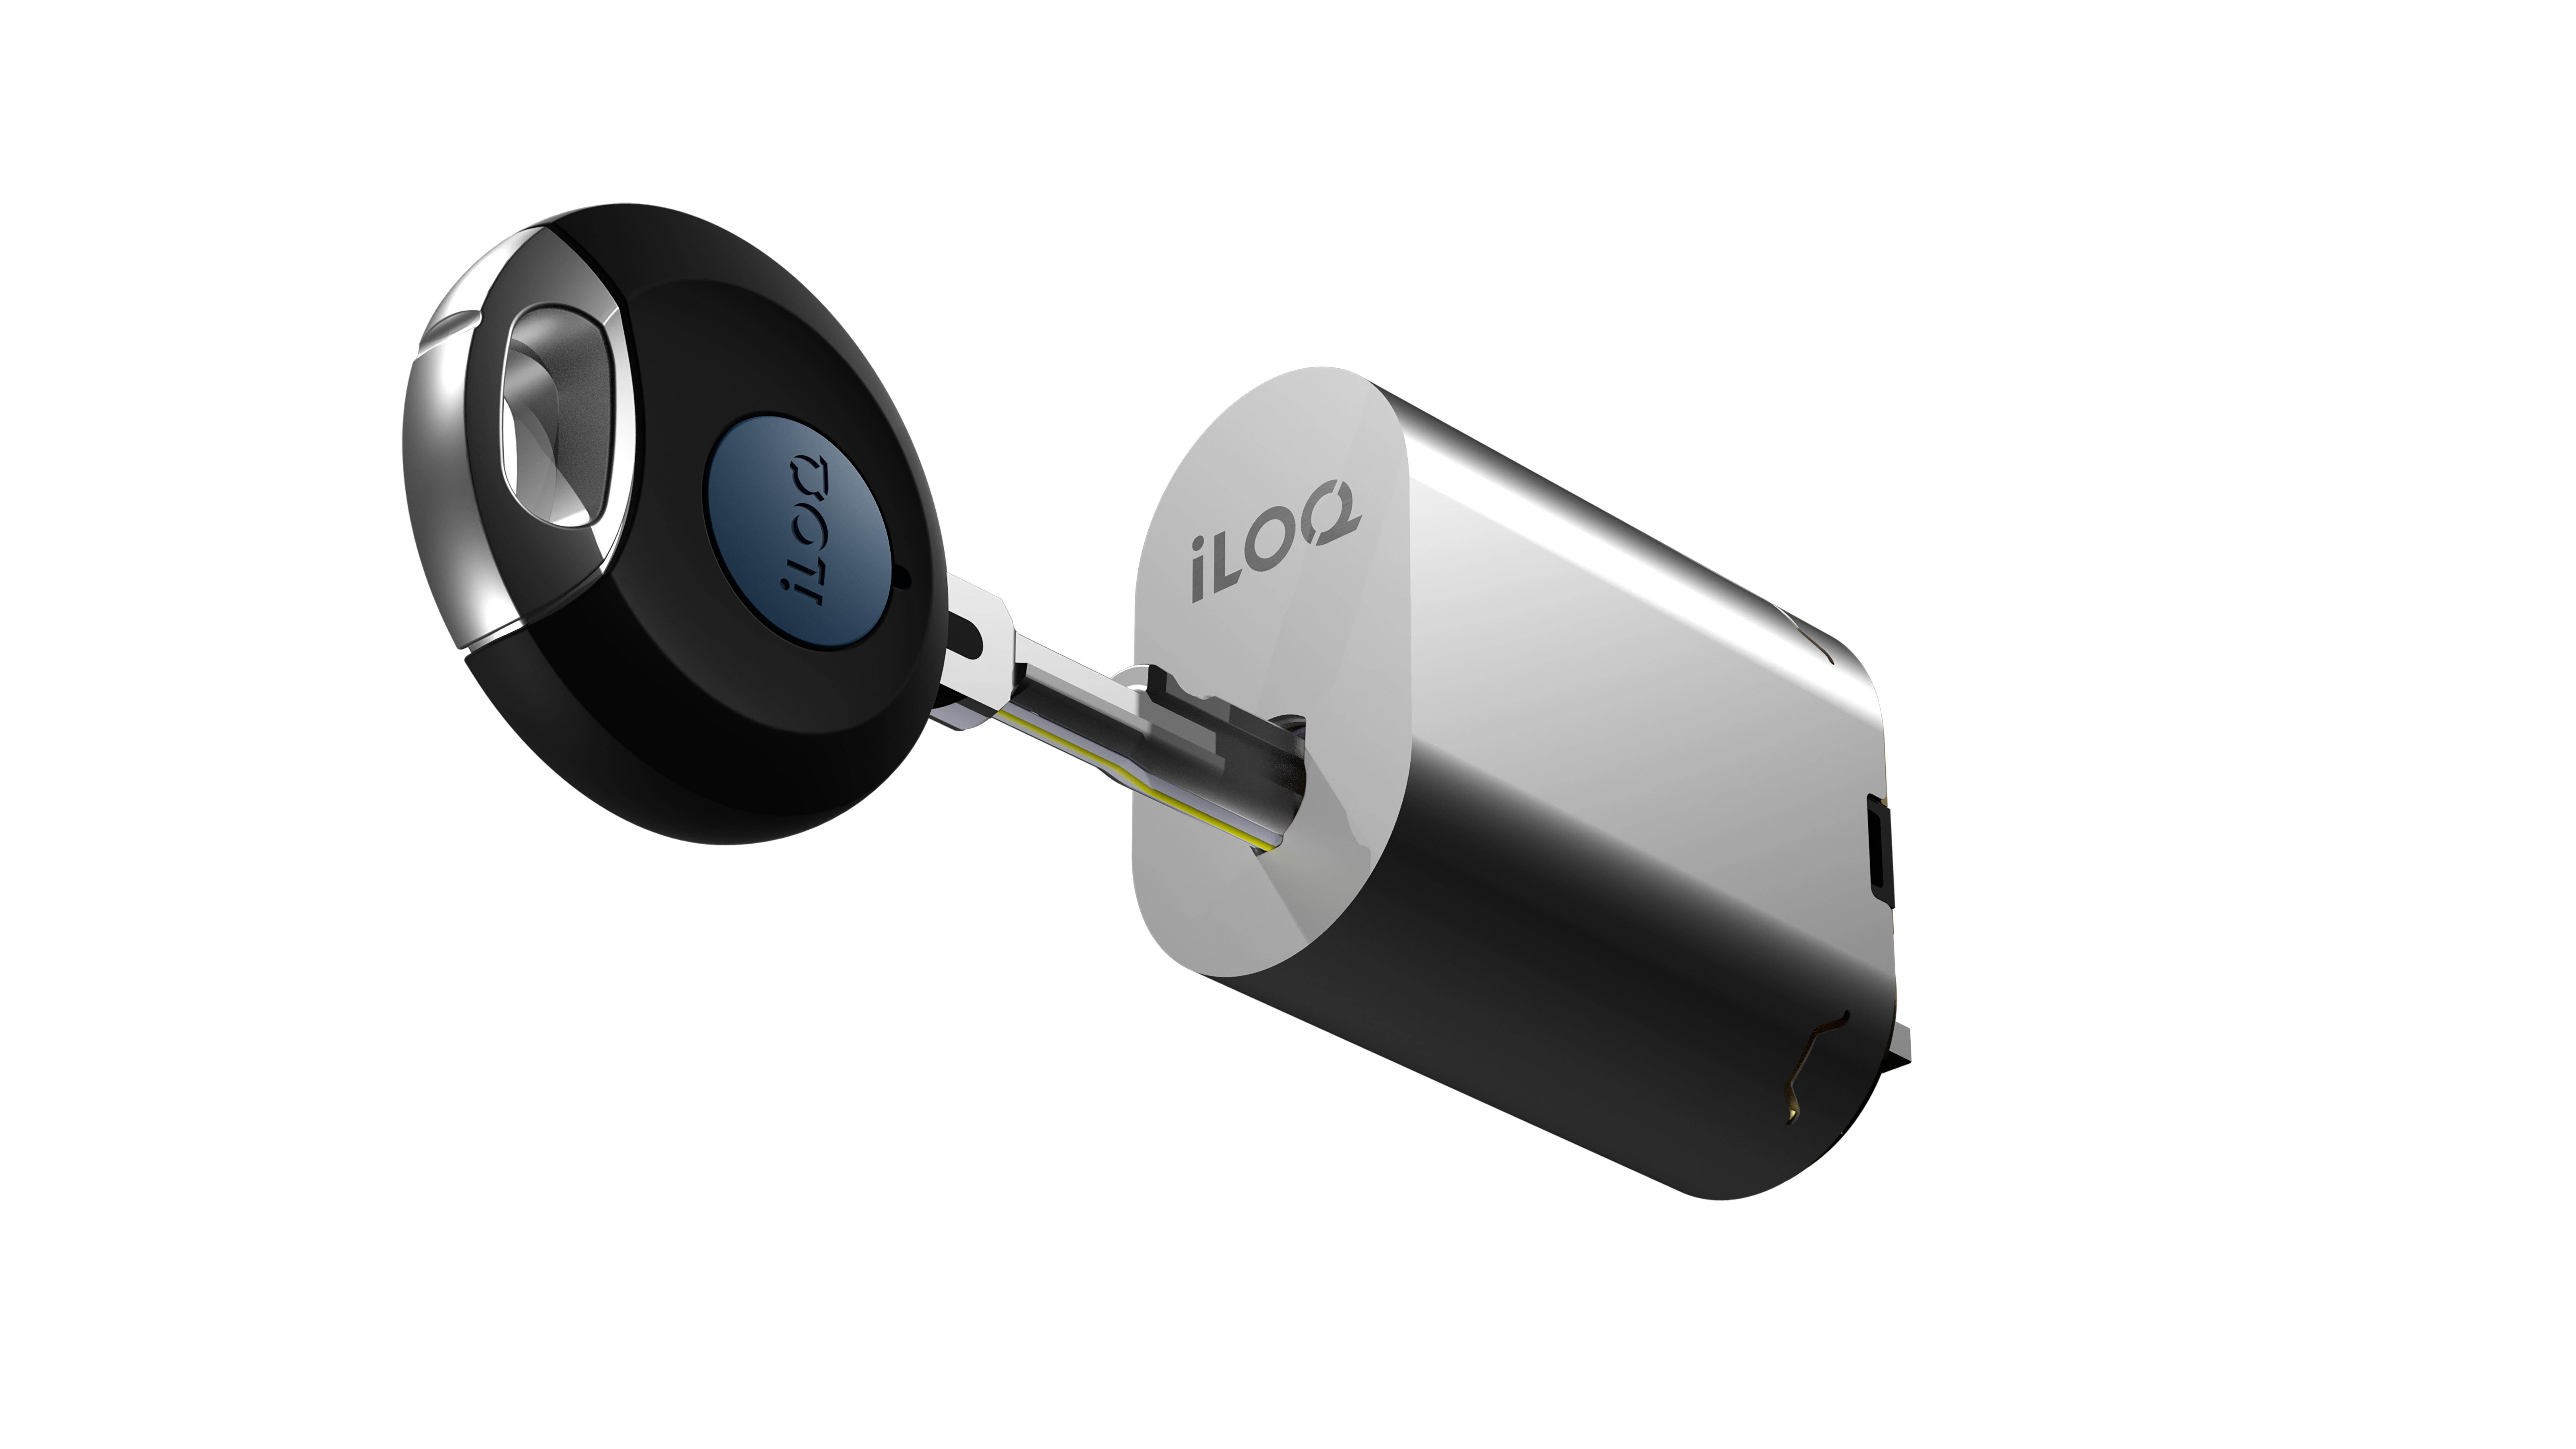 iloq s5 key and cylinder